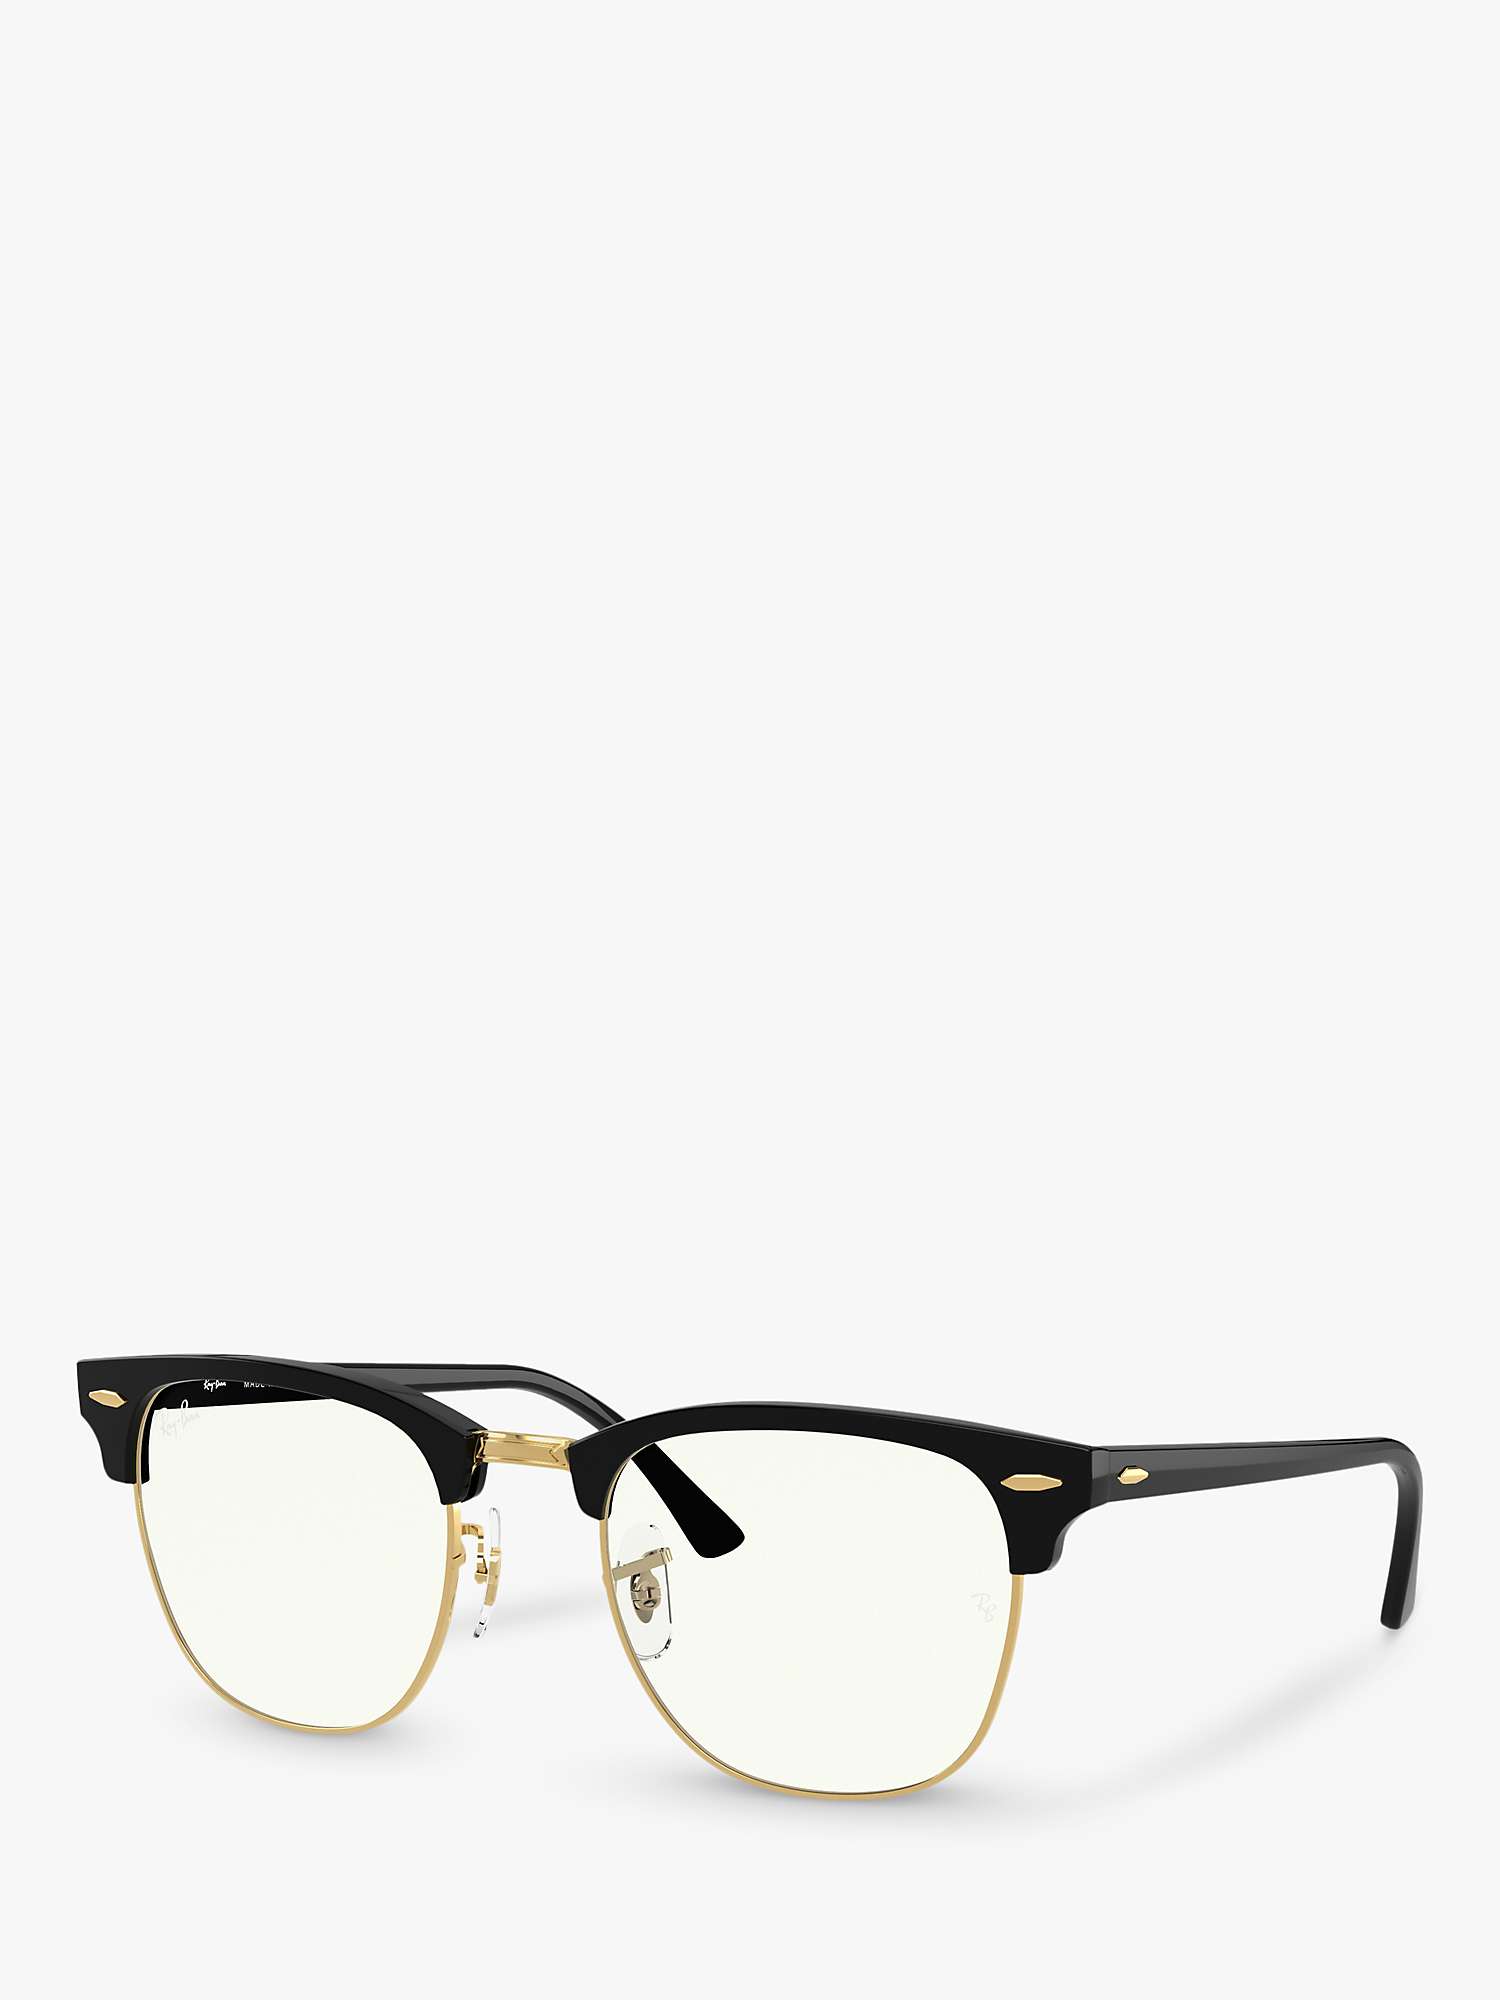 Buy Ray-Ban RB3016 Women's Square Sunglasses, Black Online at johnlewis.com